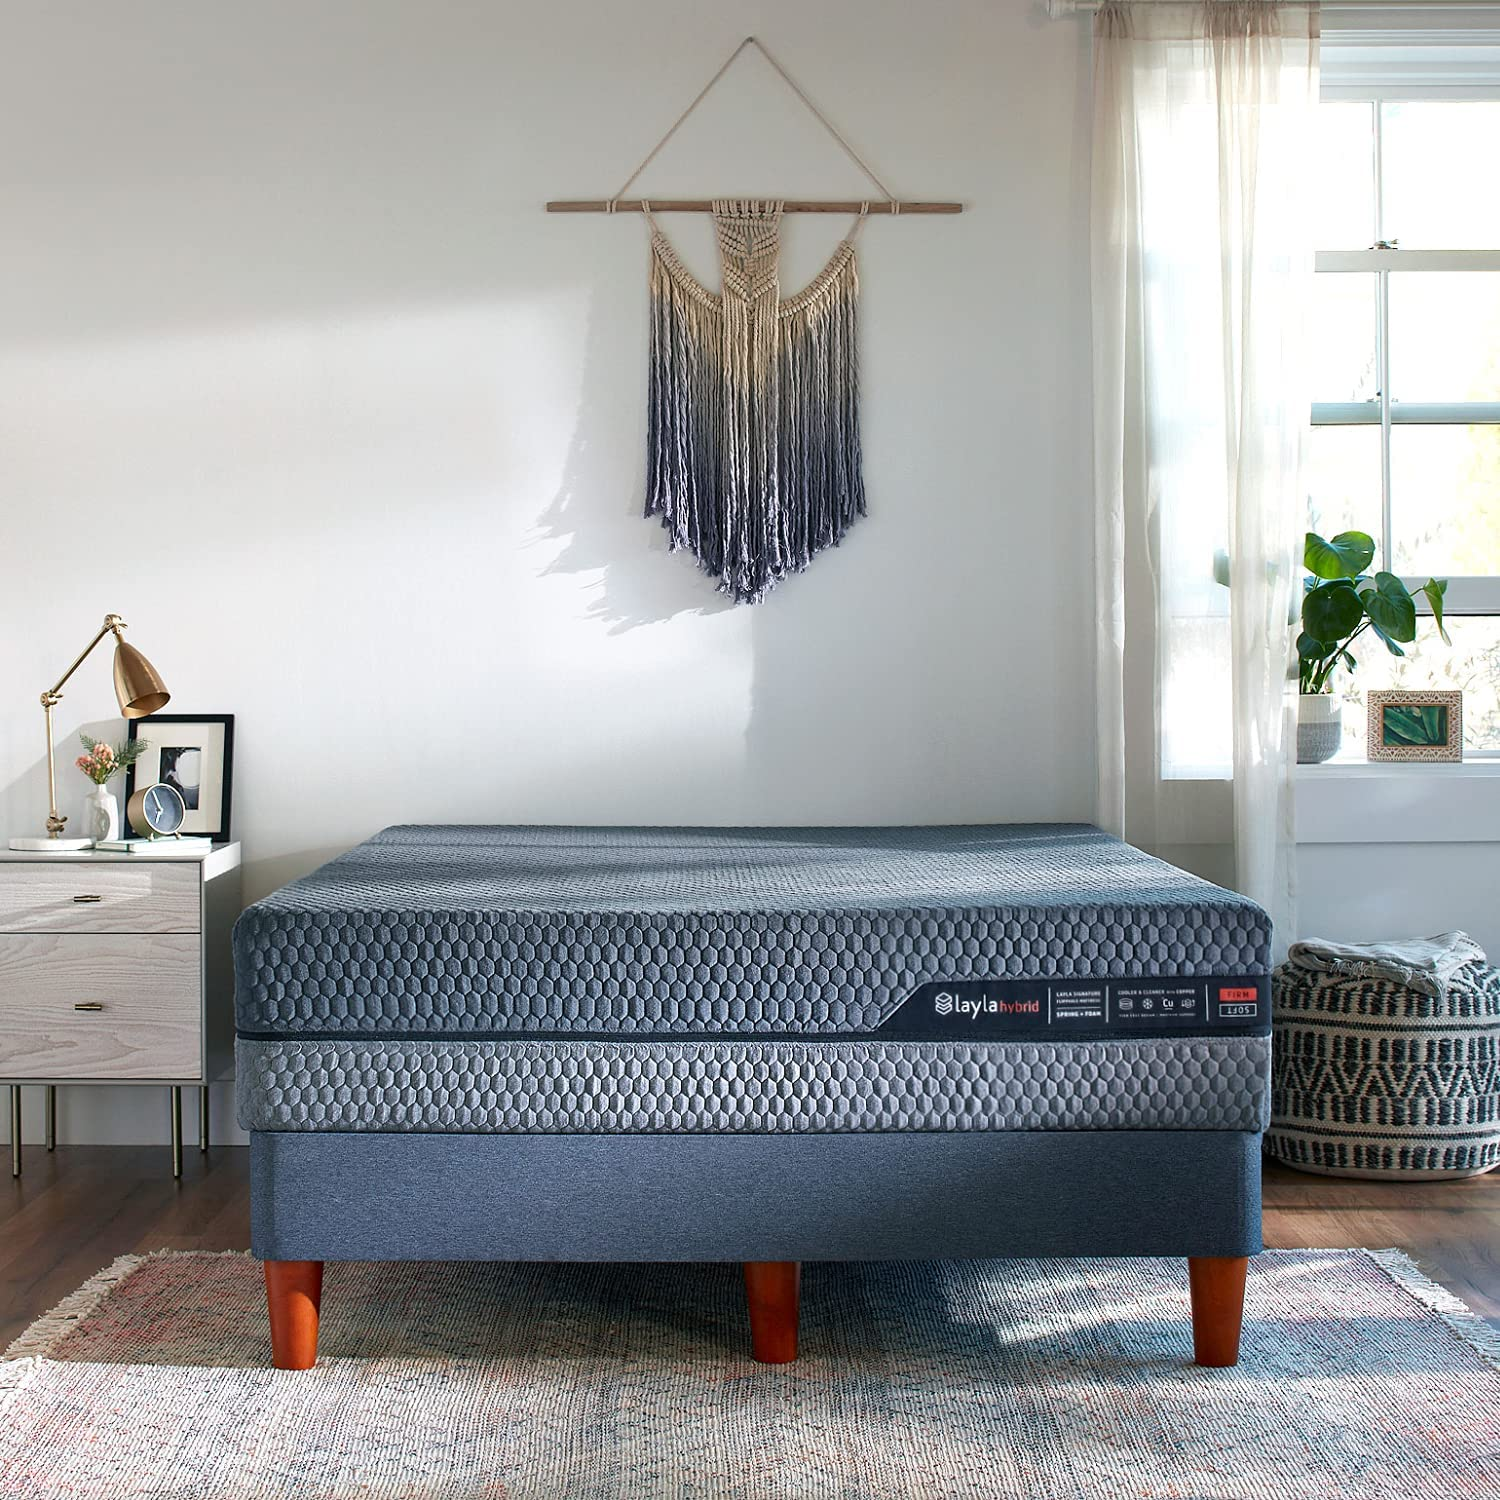 This Layla Hybrid mattress is designed to give you maximum comfort and support for your spine and joints.